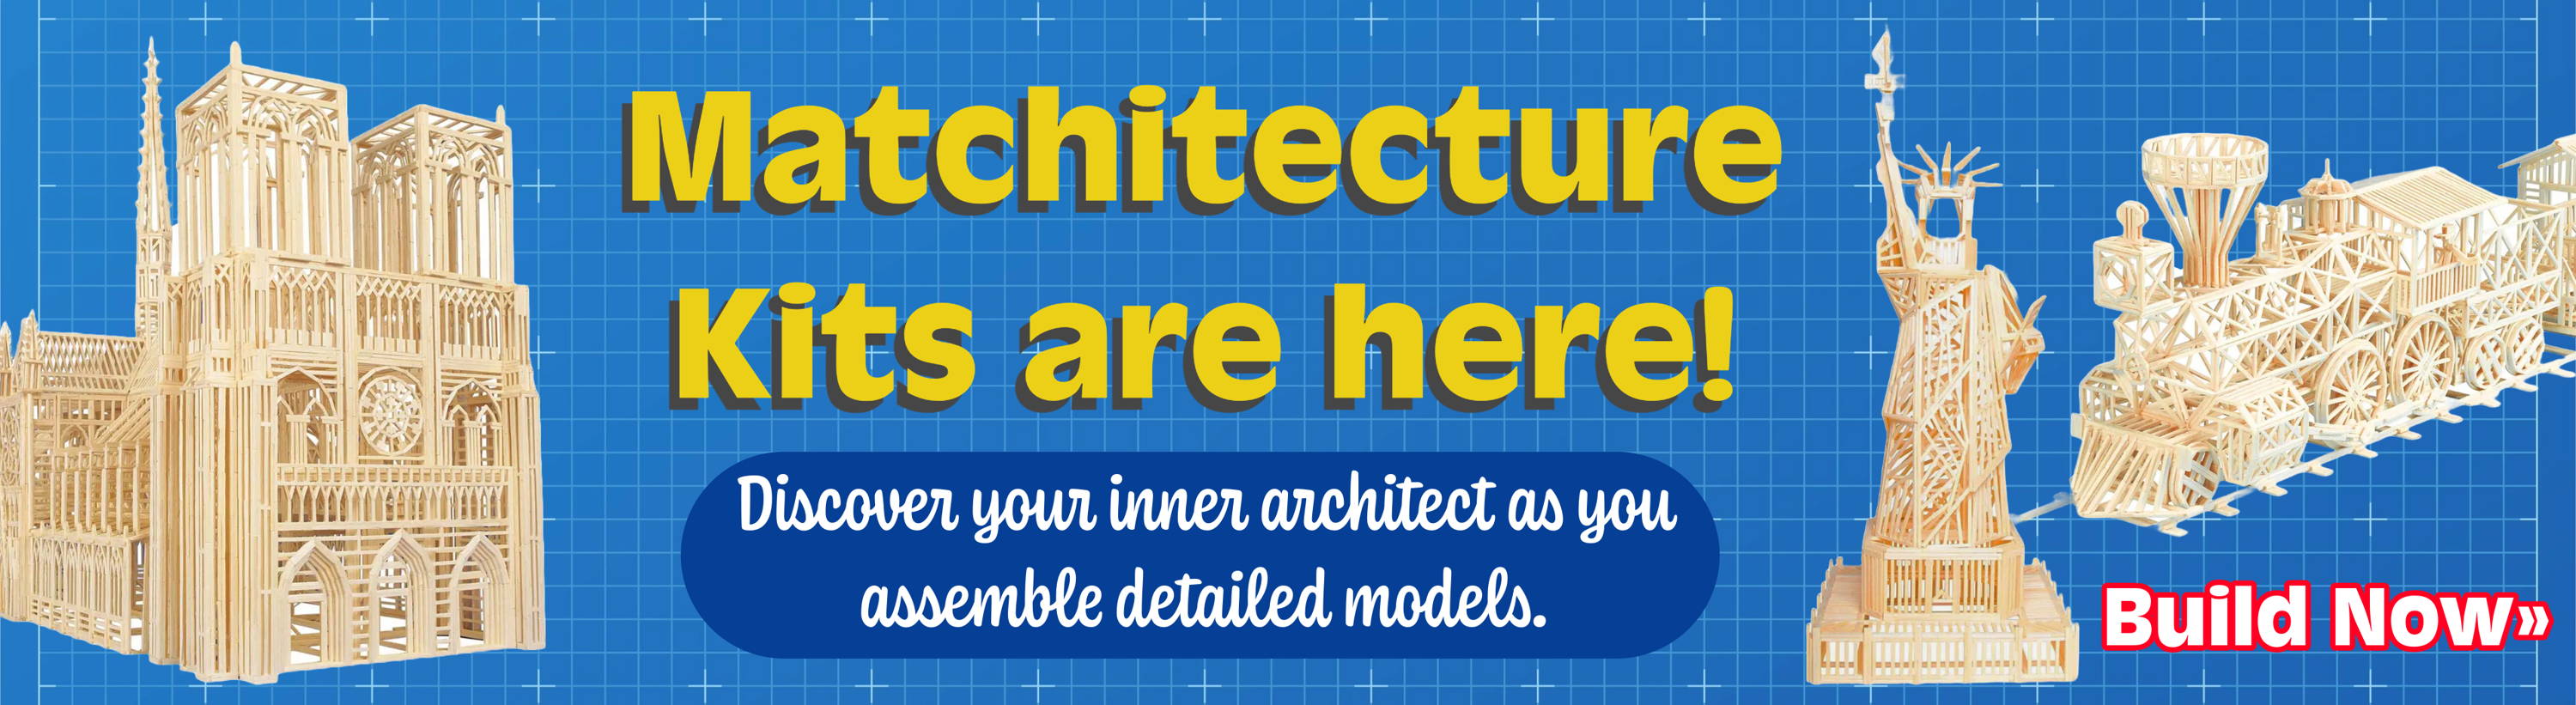 Matchitecture Kits are here! Discover your inner architect. Image: Selected Matchitecture Kits.